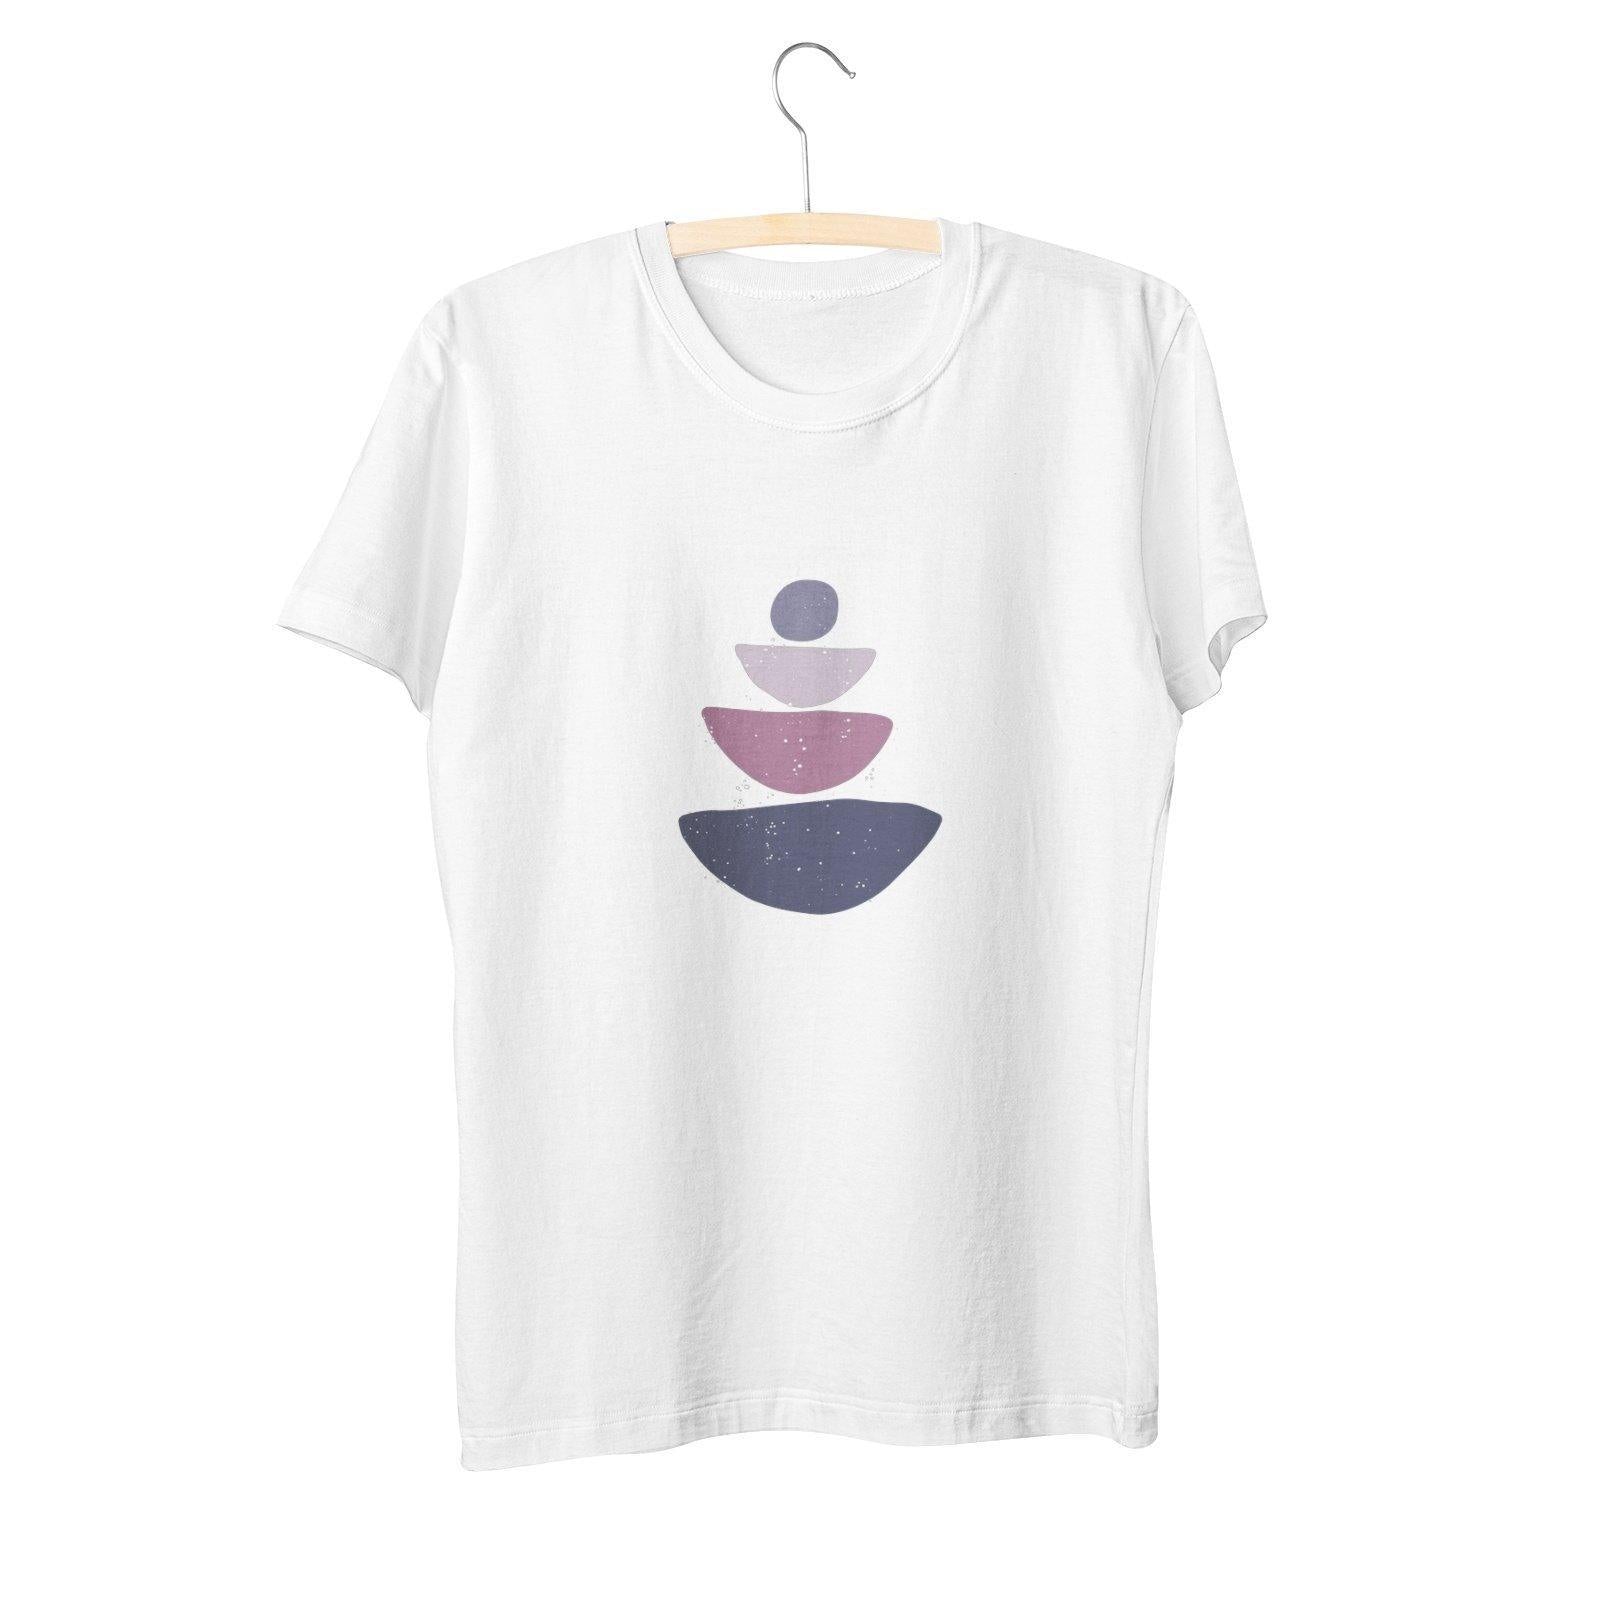 Couple's Crew Neck Cotton Jersey Yoga T-Shirt - Zen Style - Personal Hour for Yoga and Meditations 